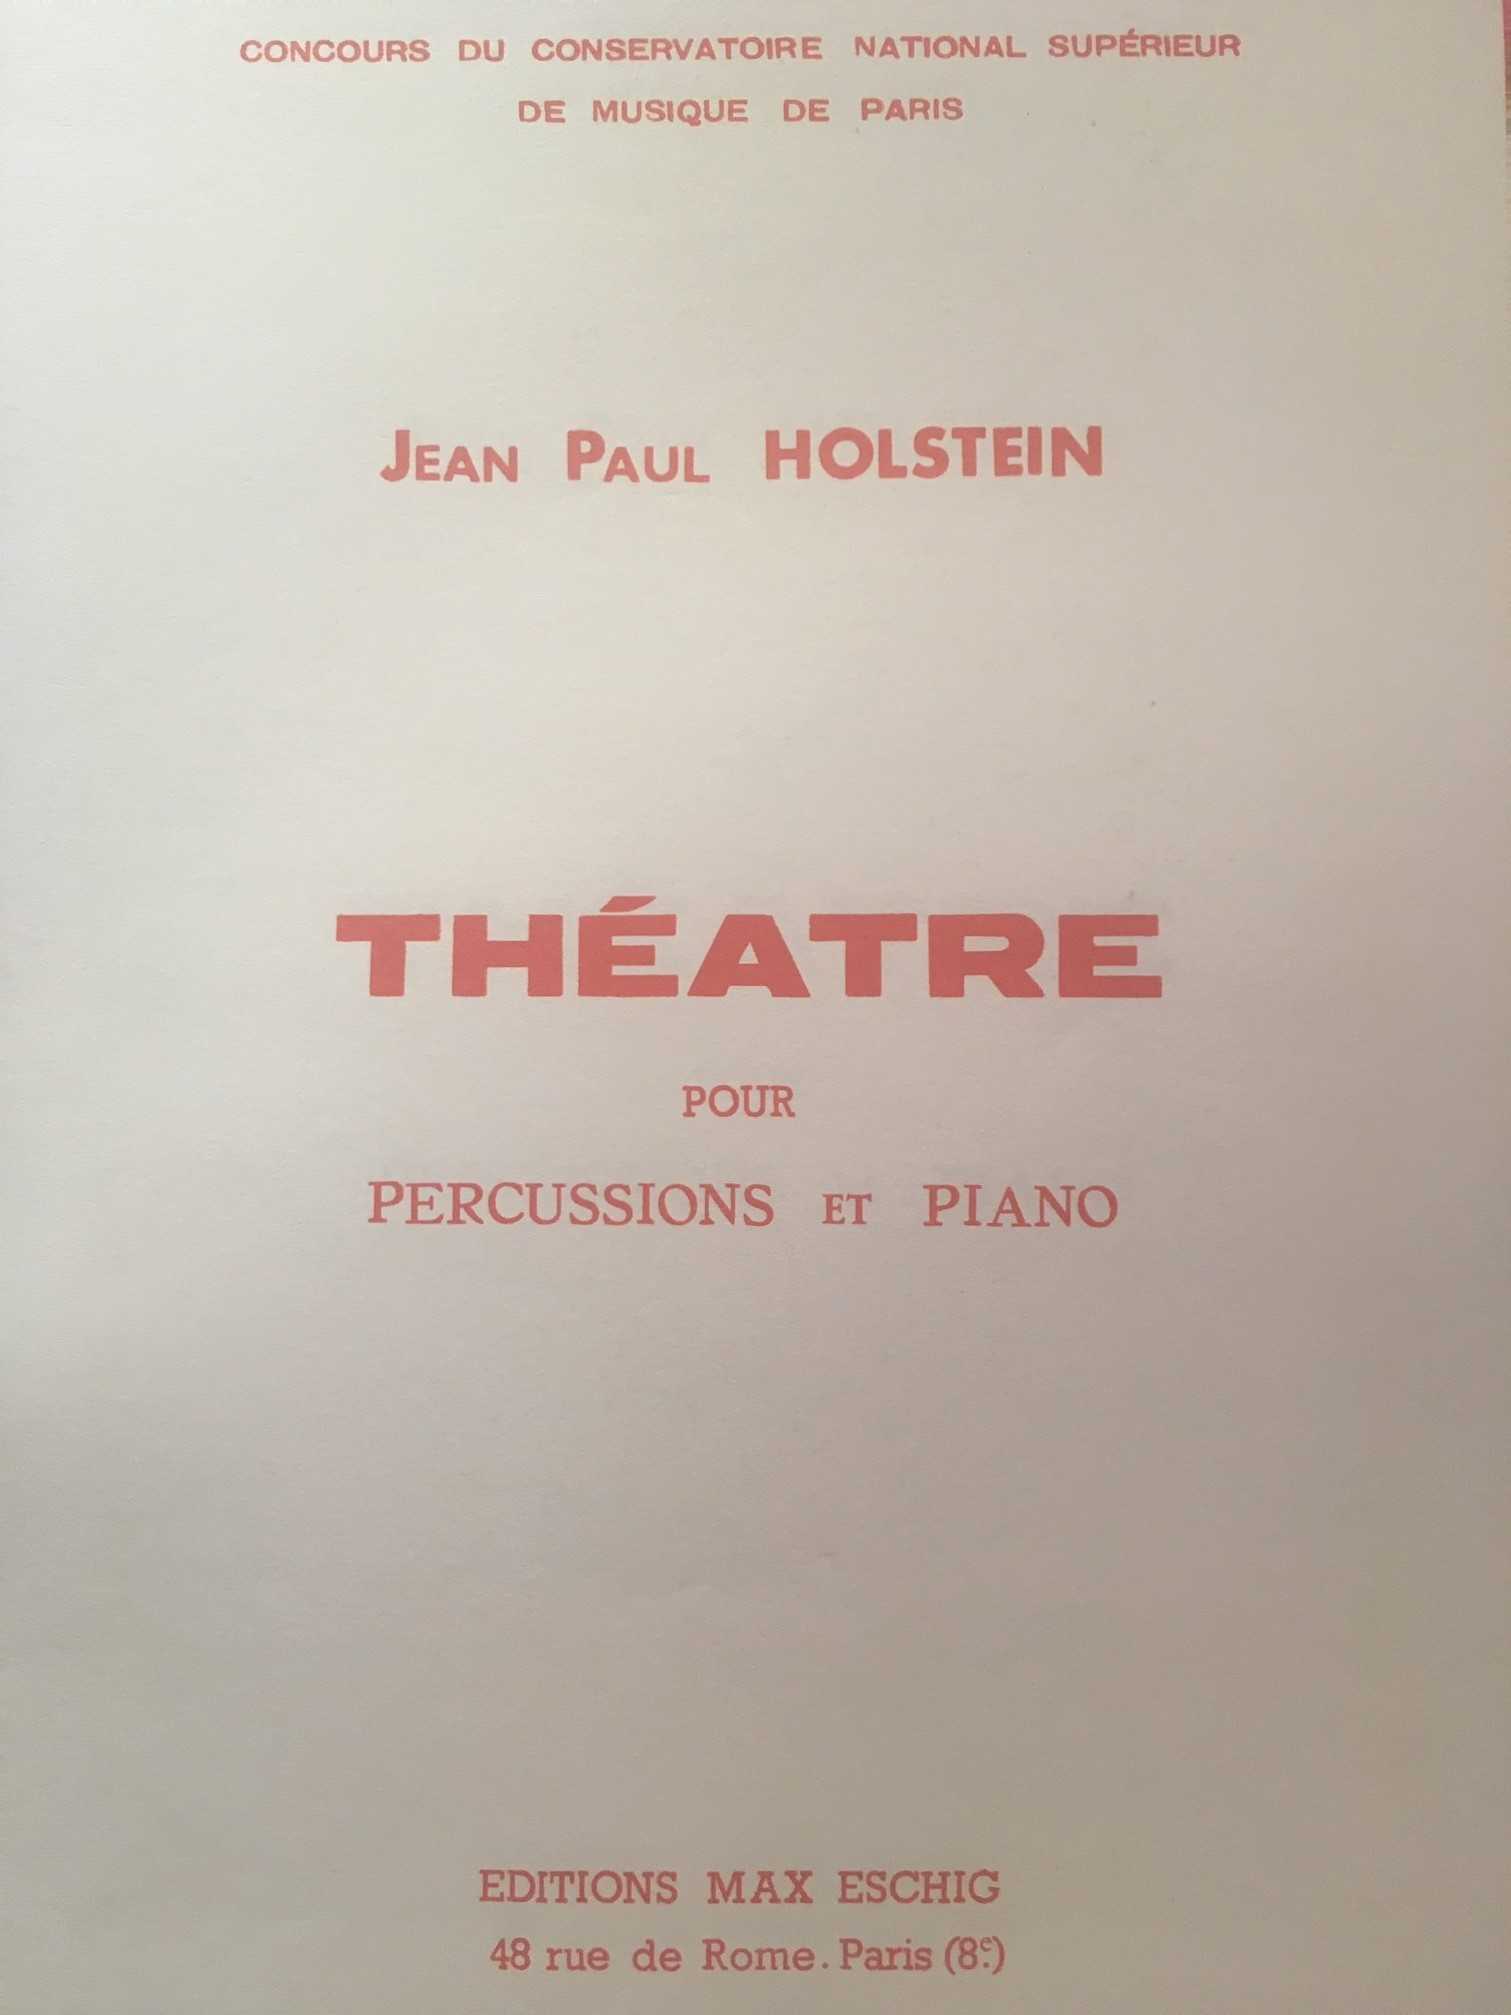 Theatre - percussion and piano by Jean Paul Holstein